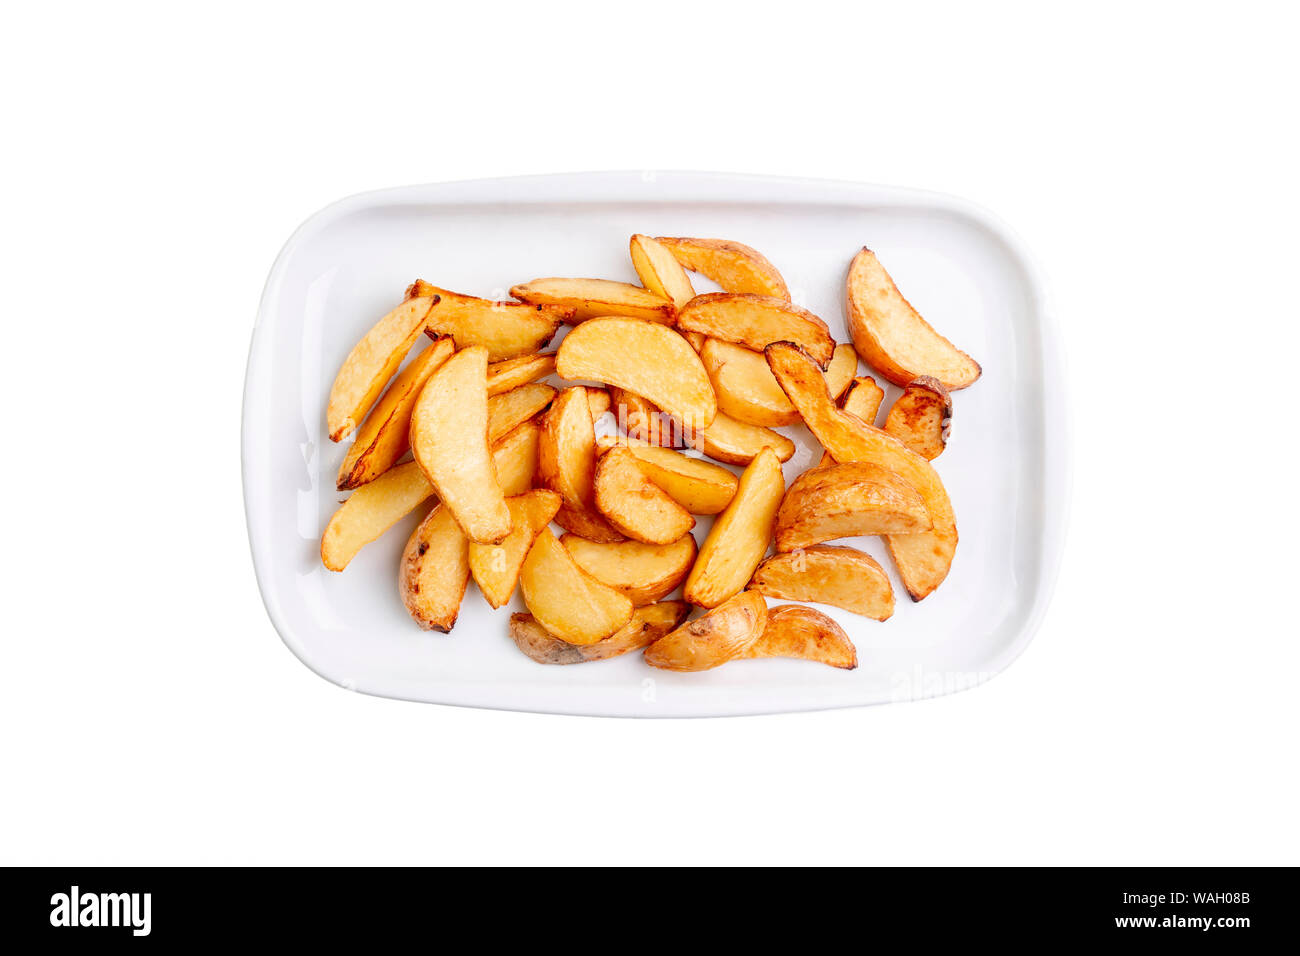 Potato wedges on white plate isolated on white background. Hot fastfood. Top view Food Image for menu card, web design, site, shop or delivery. High q Stock Photo